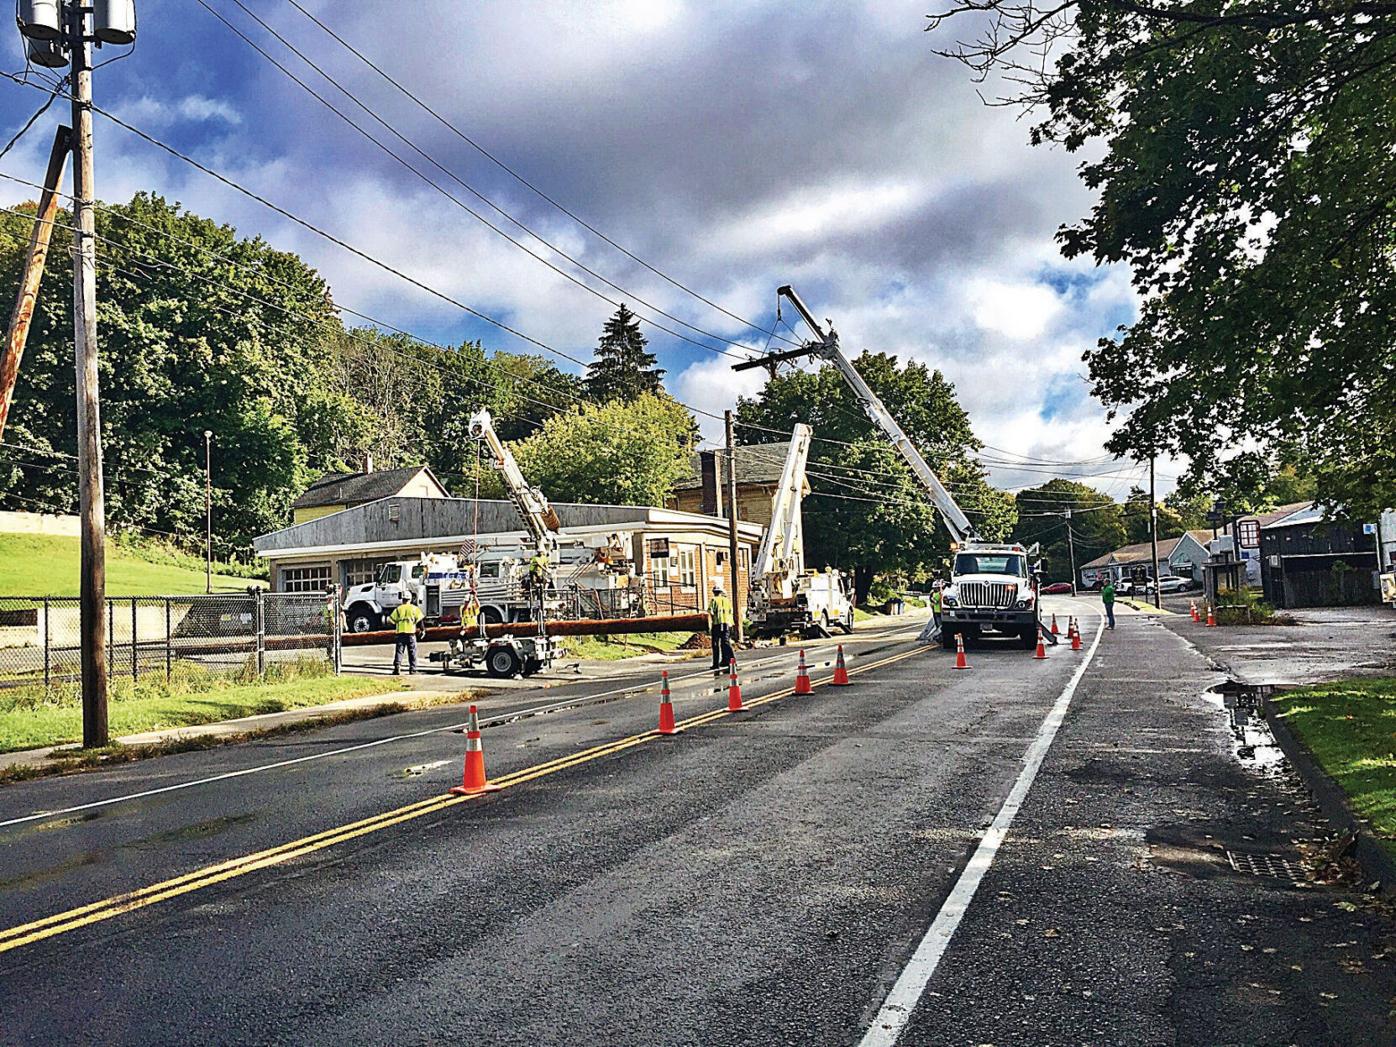 Transformer fire knocks out power, snarls traffic in Great Barrington